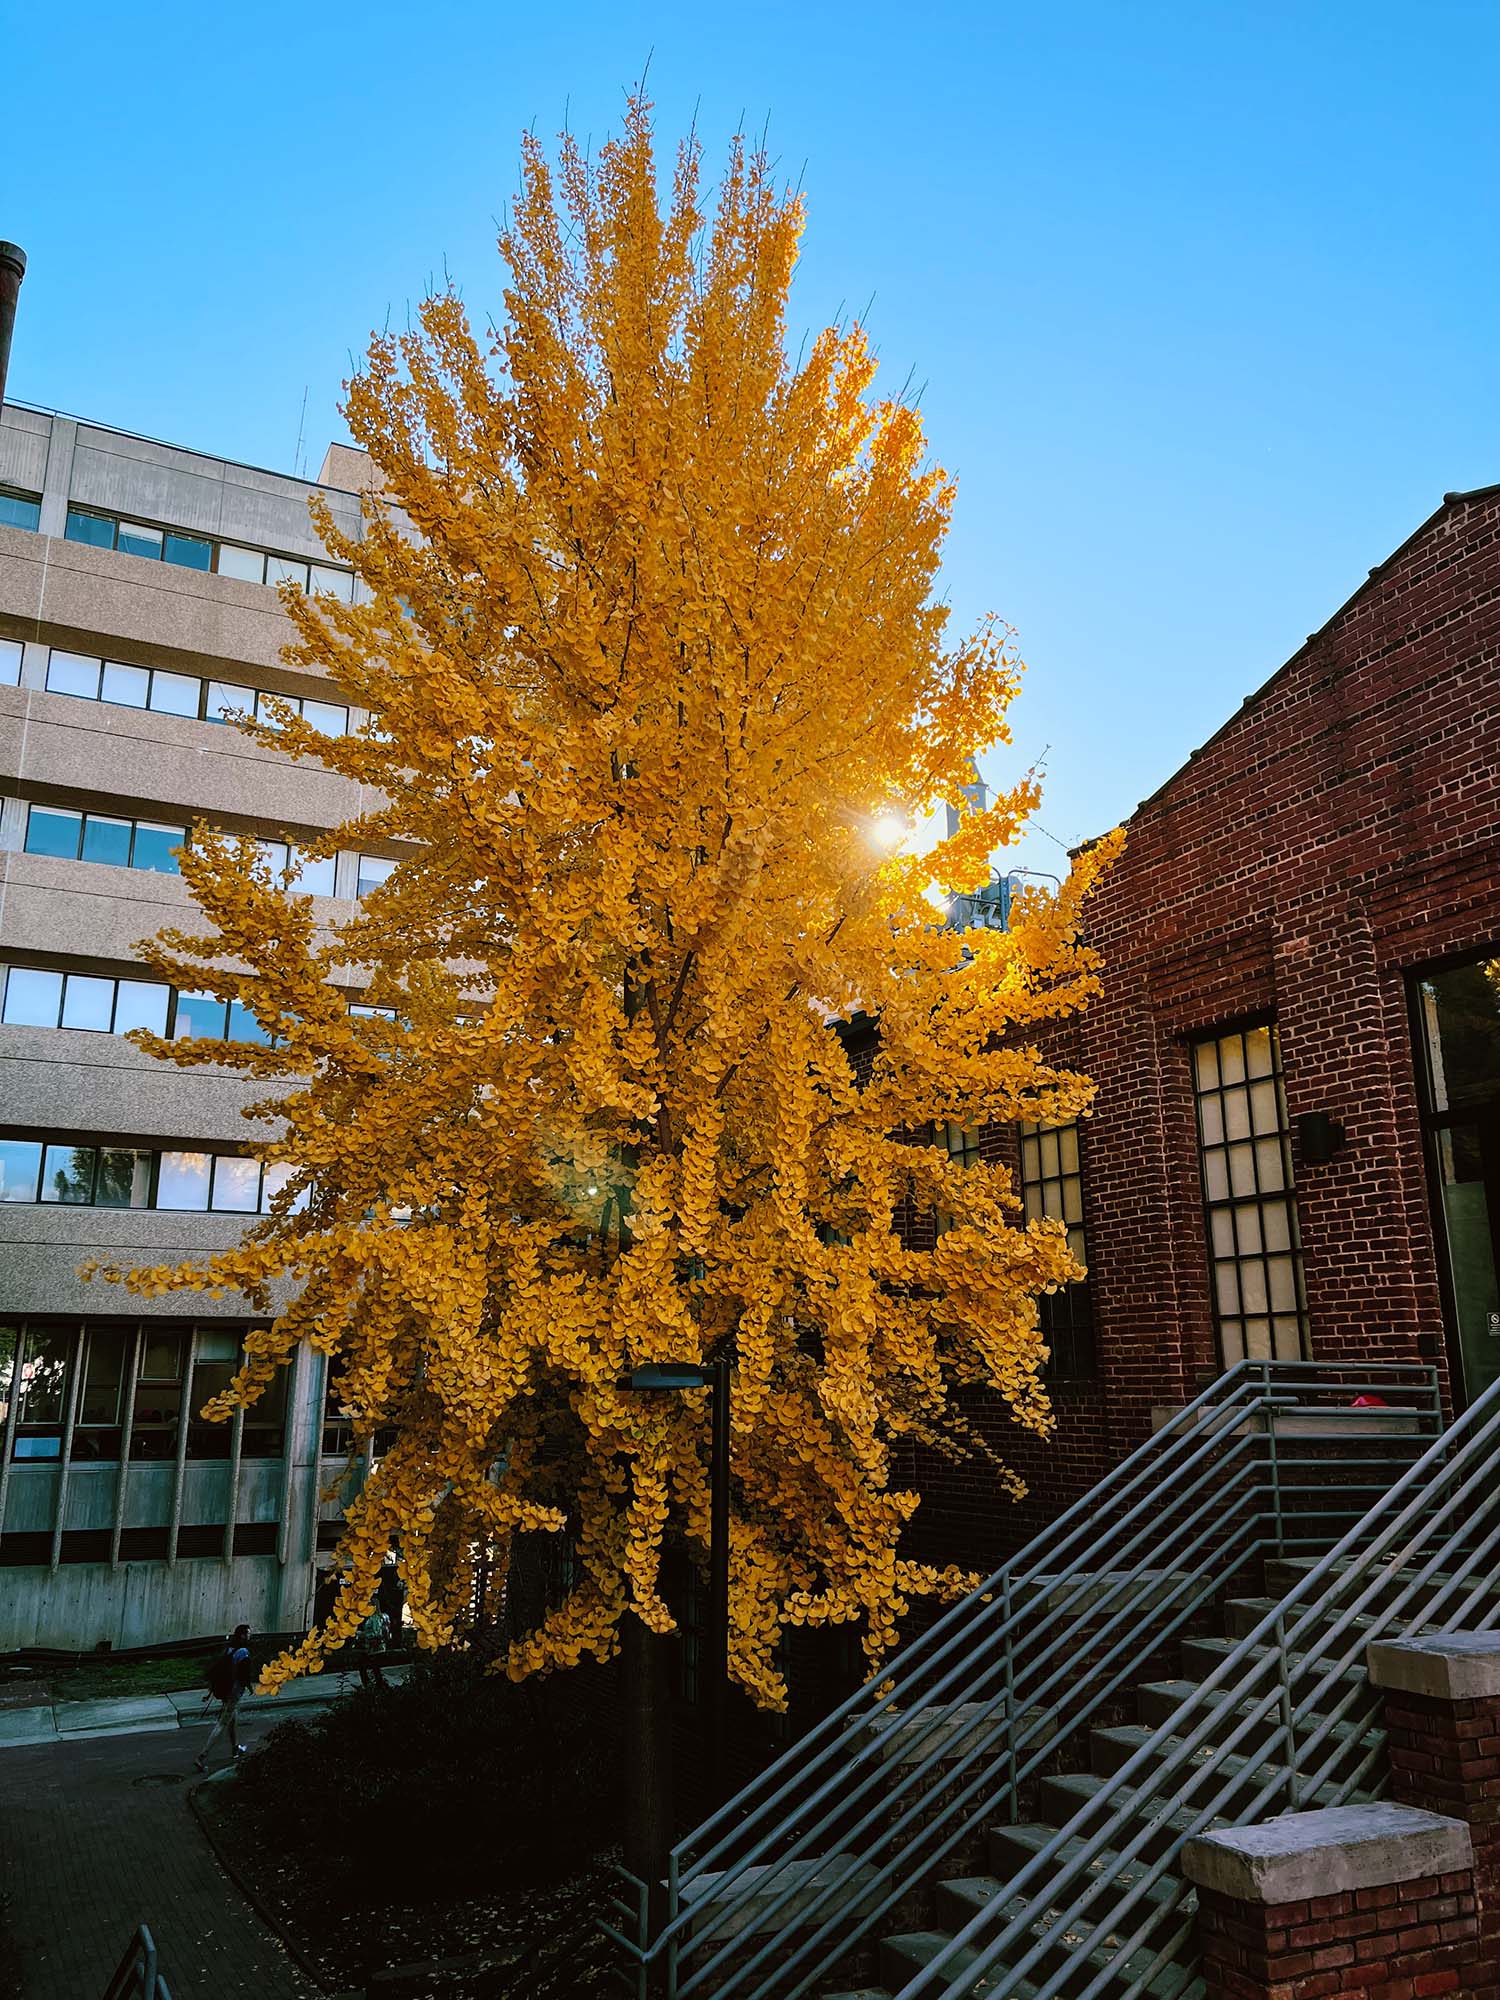 The Tree, a ginkgo tree on NC State's campus with a cult following among students.